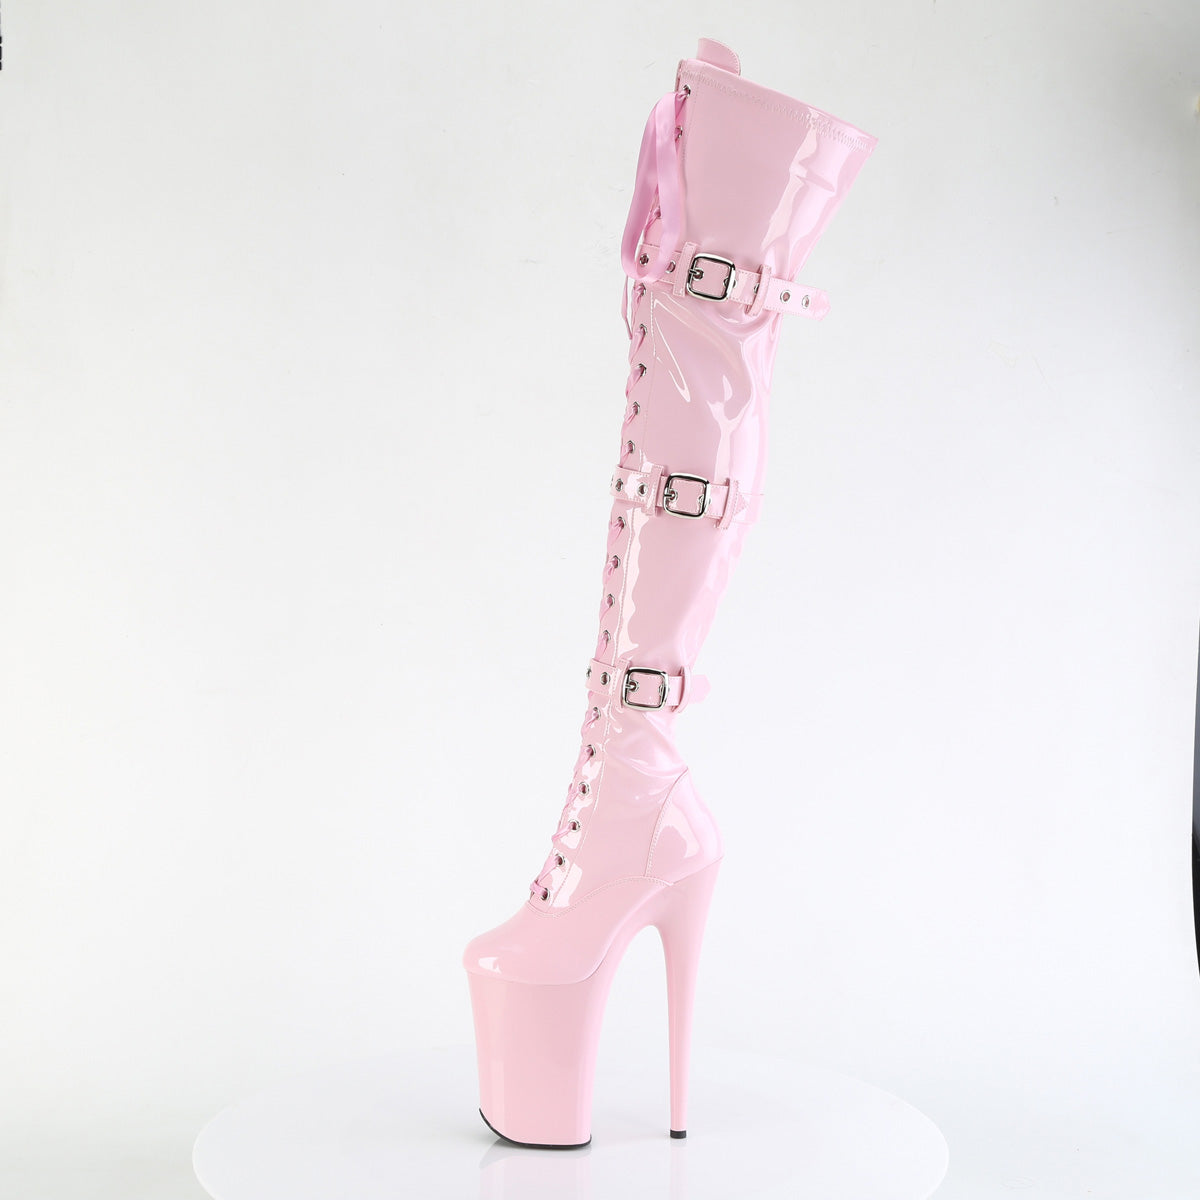 INFINITY-3028 Black Thigh High Boots Pink Multi view 4